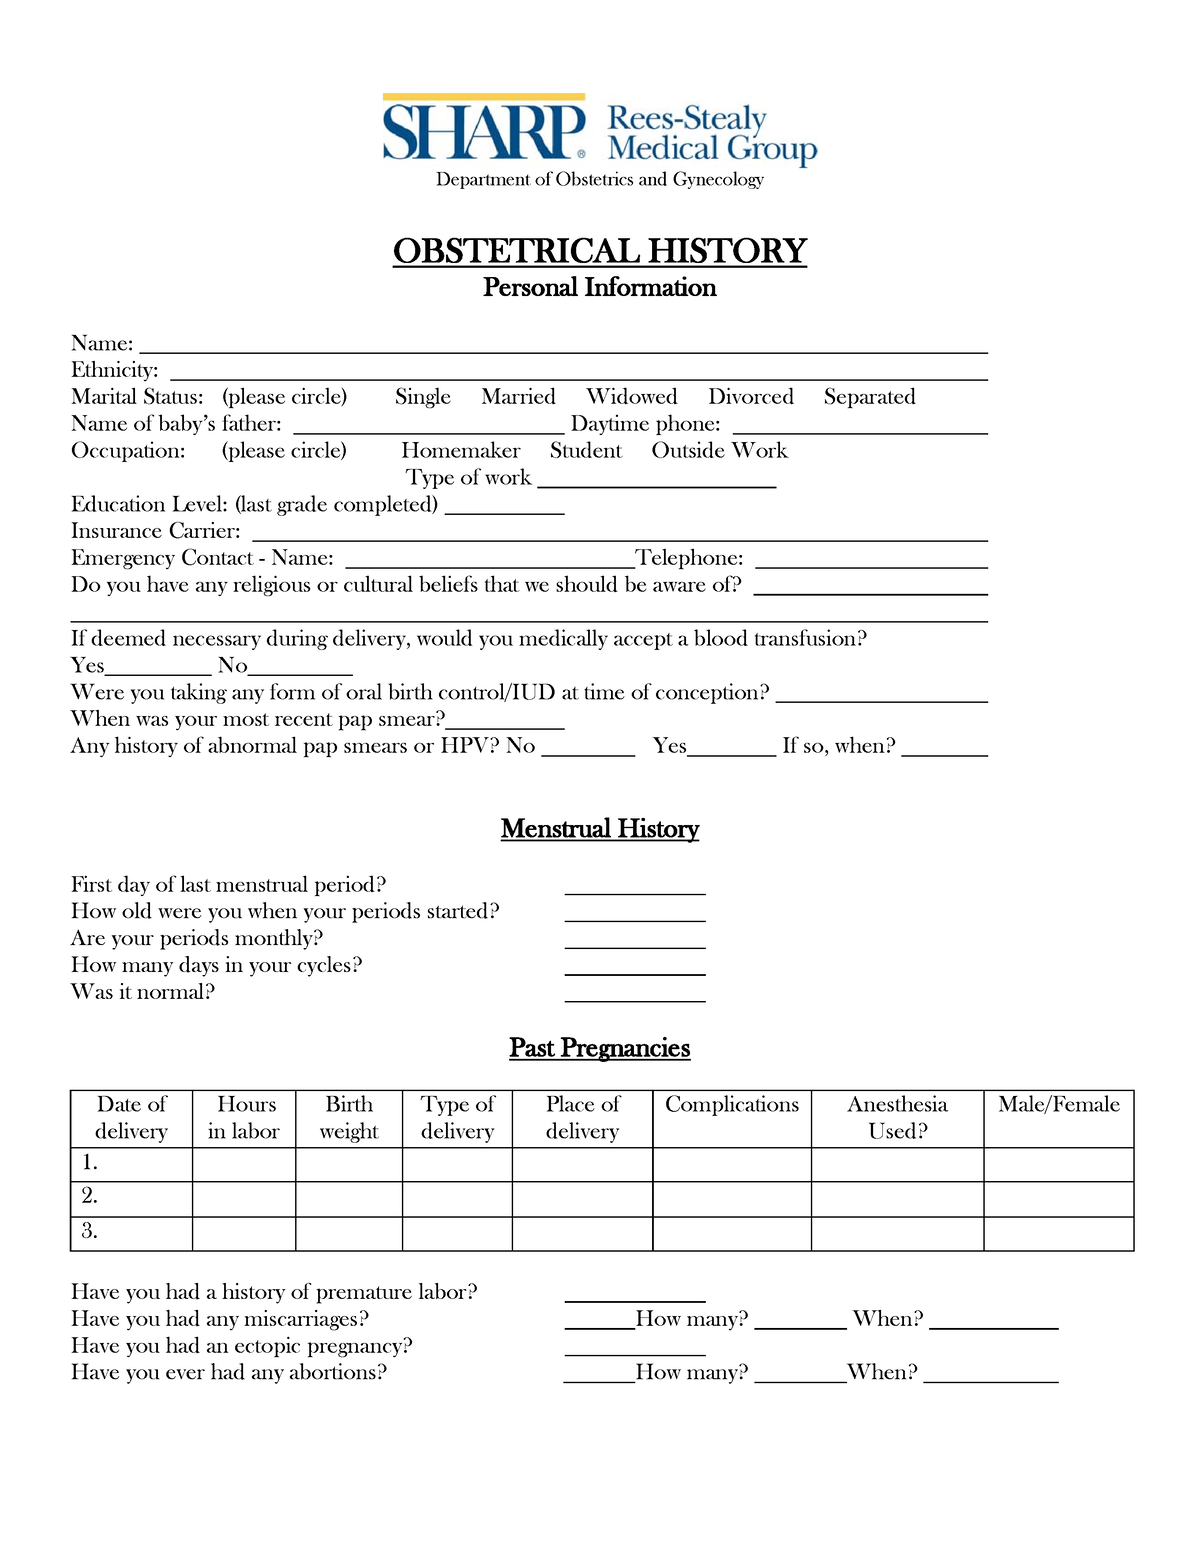 OB HX form Obstetric History Form sample format Department of